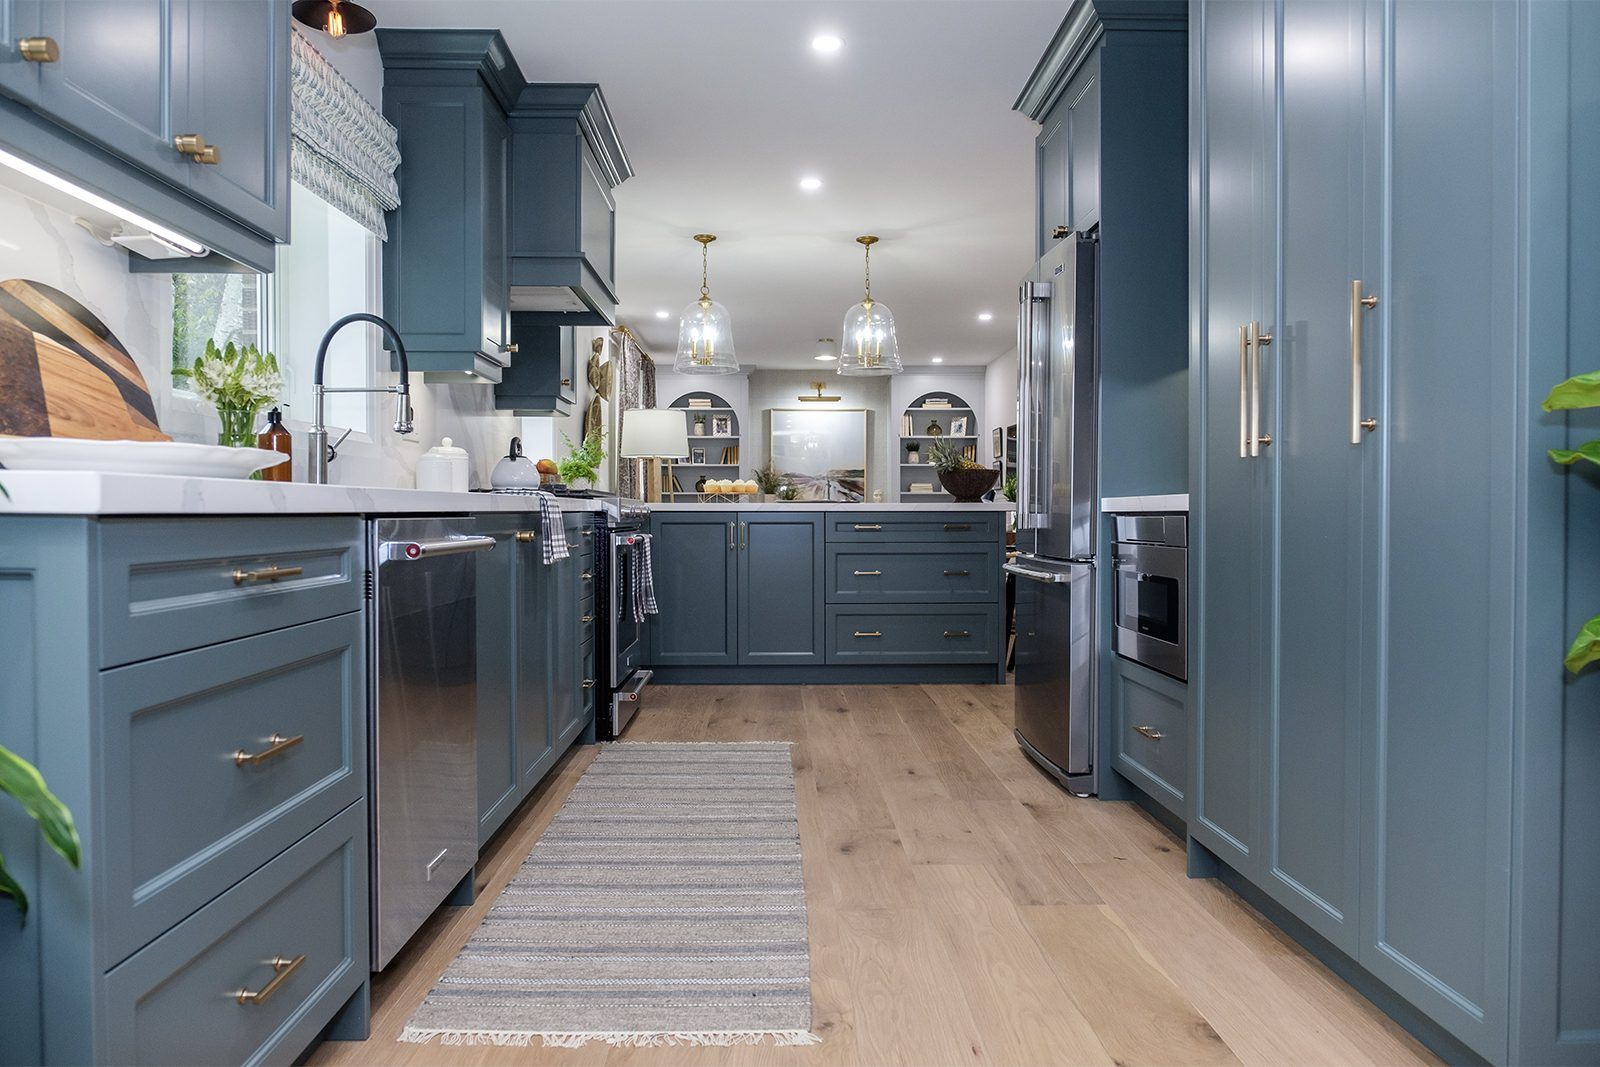 kitchen reveal, blue colors and light wood floor